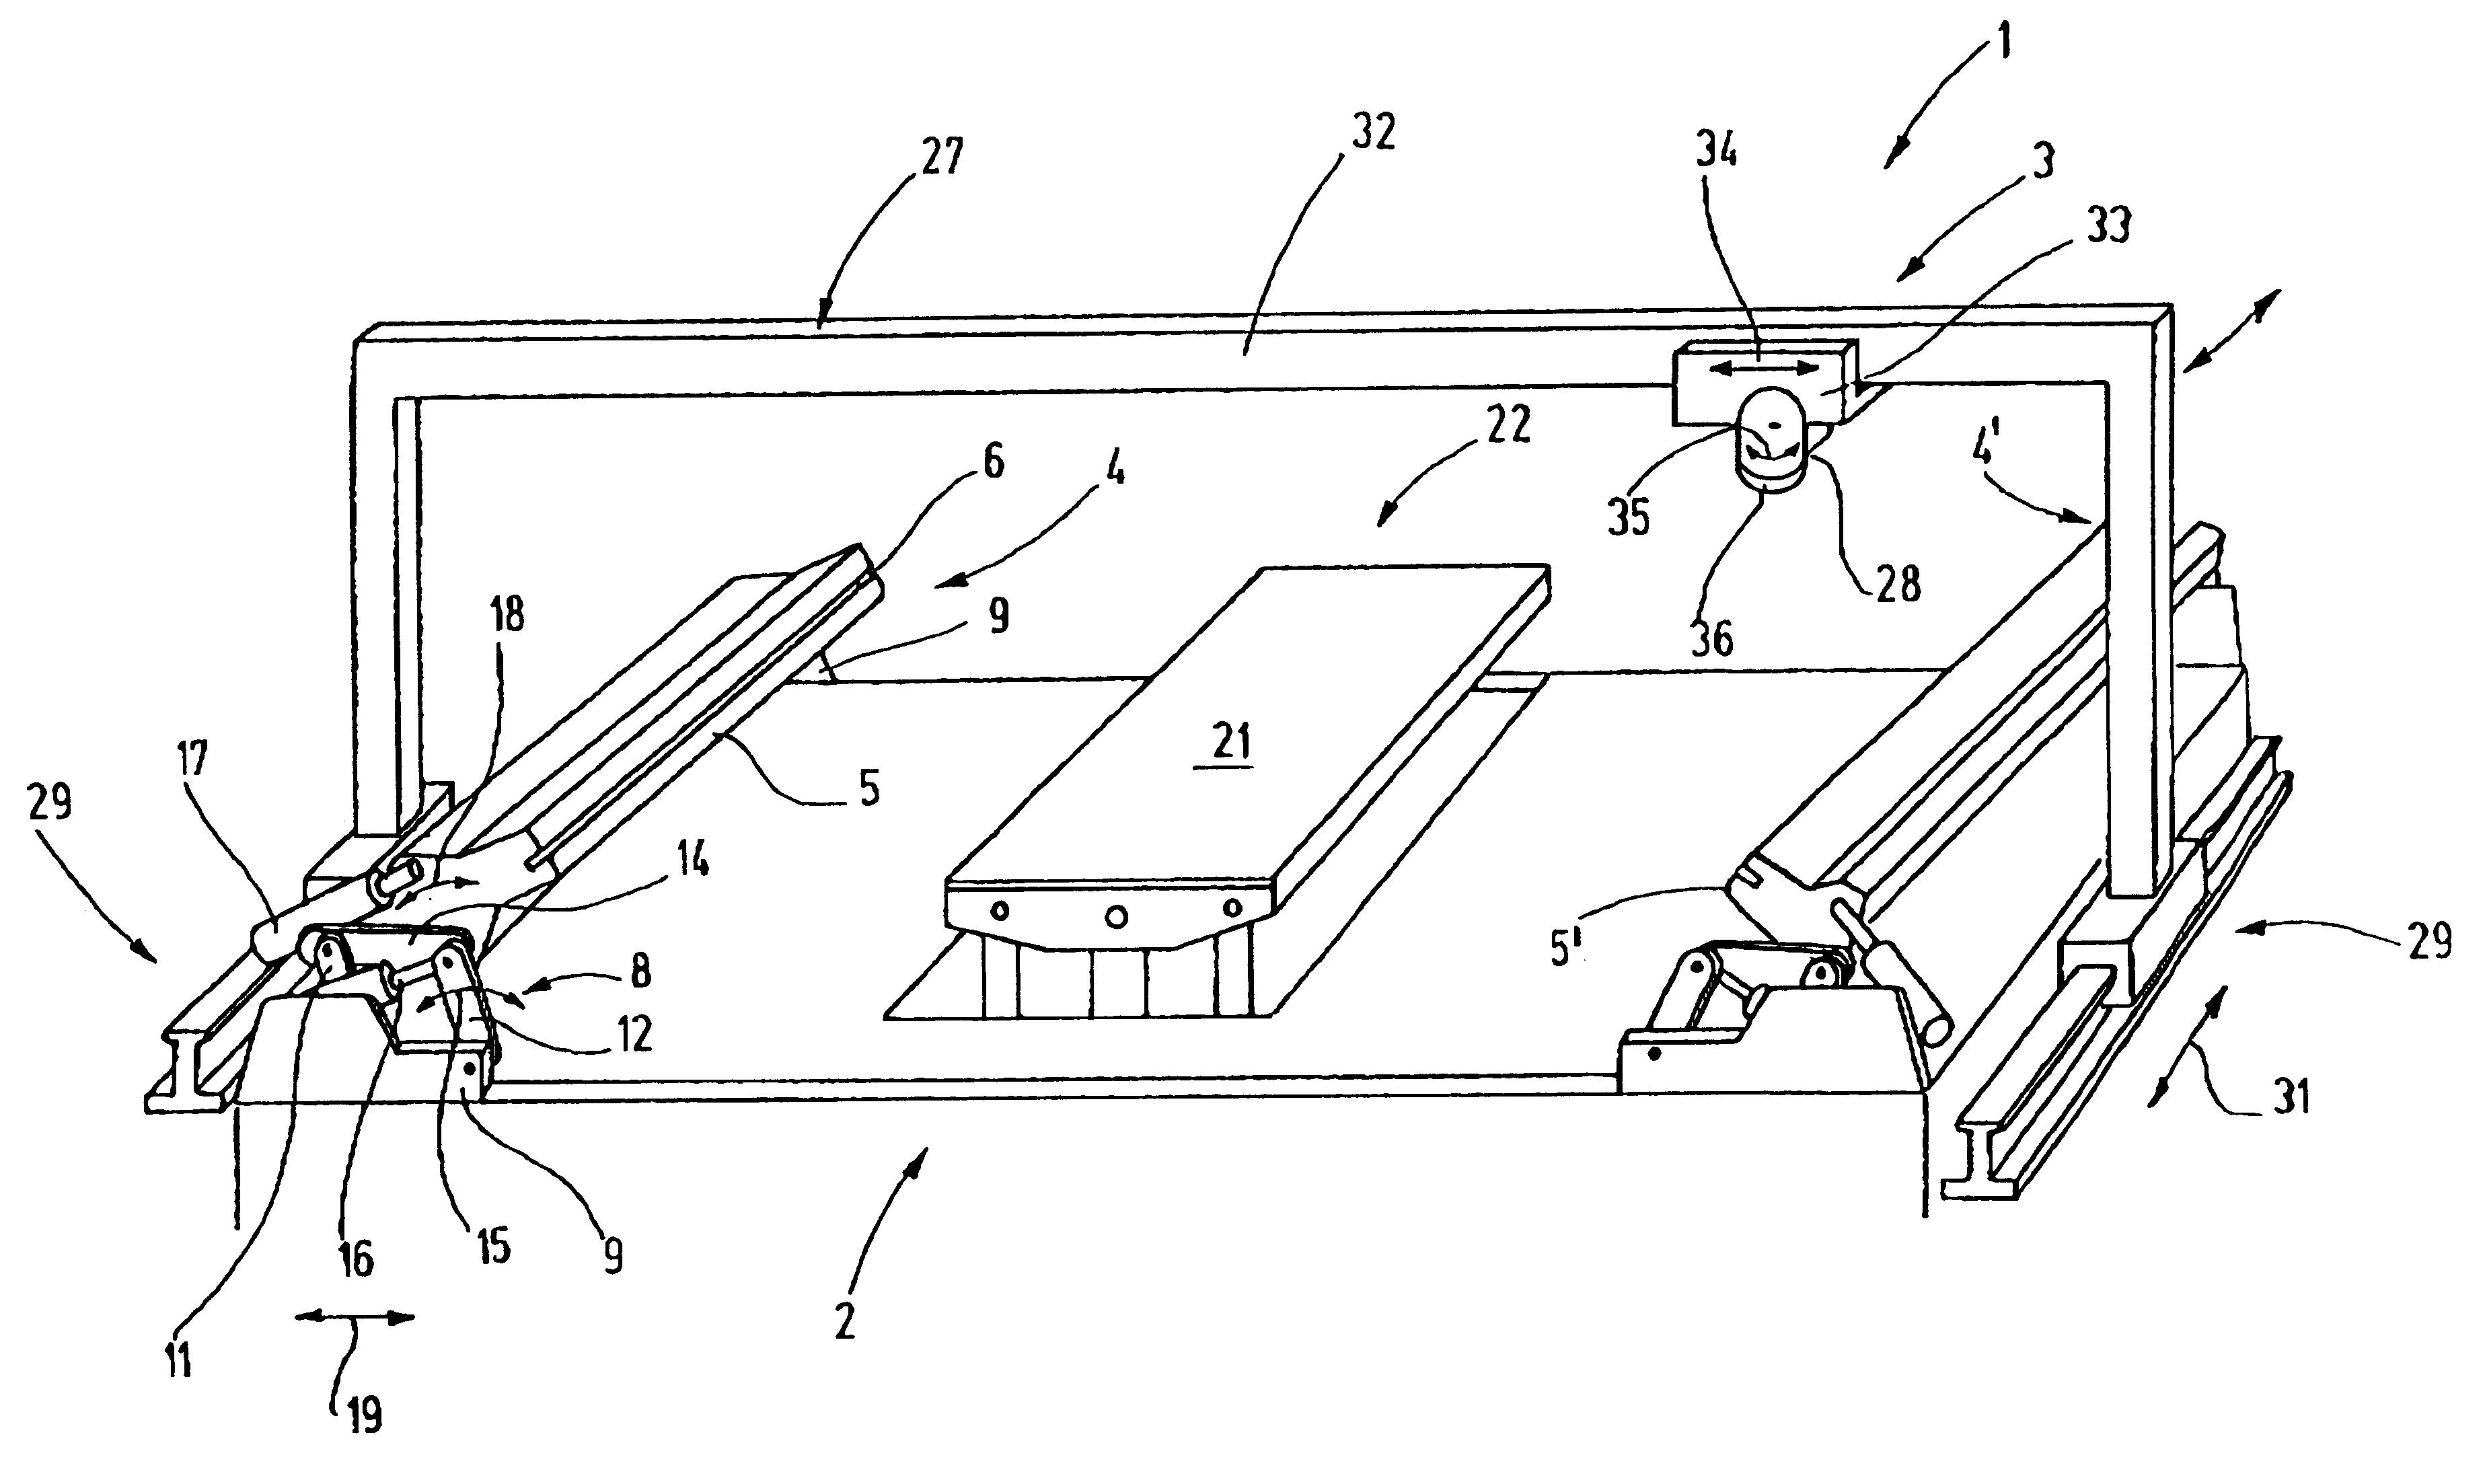 Laser stretch-forming processing apparatus for sheet metal